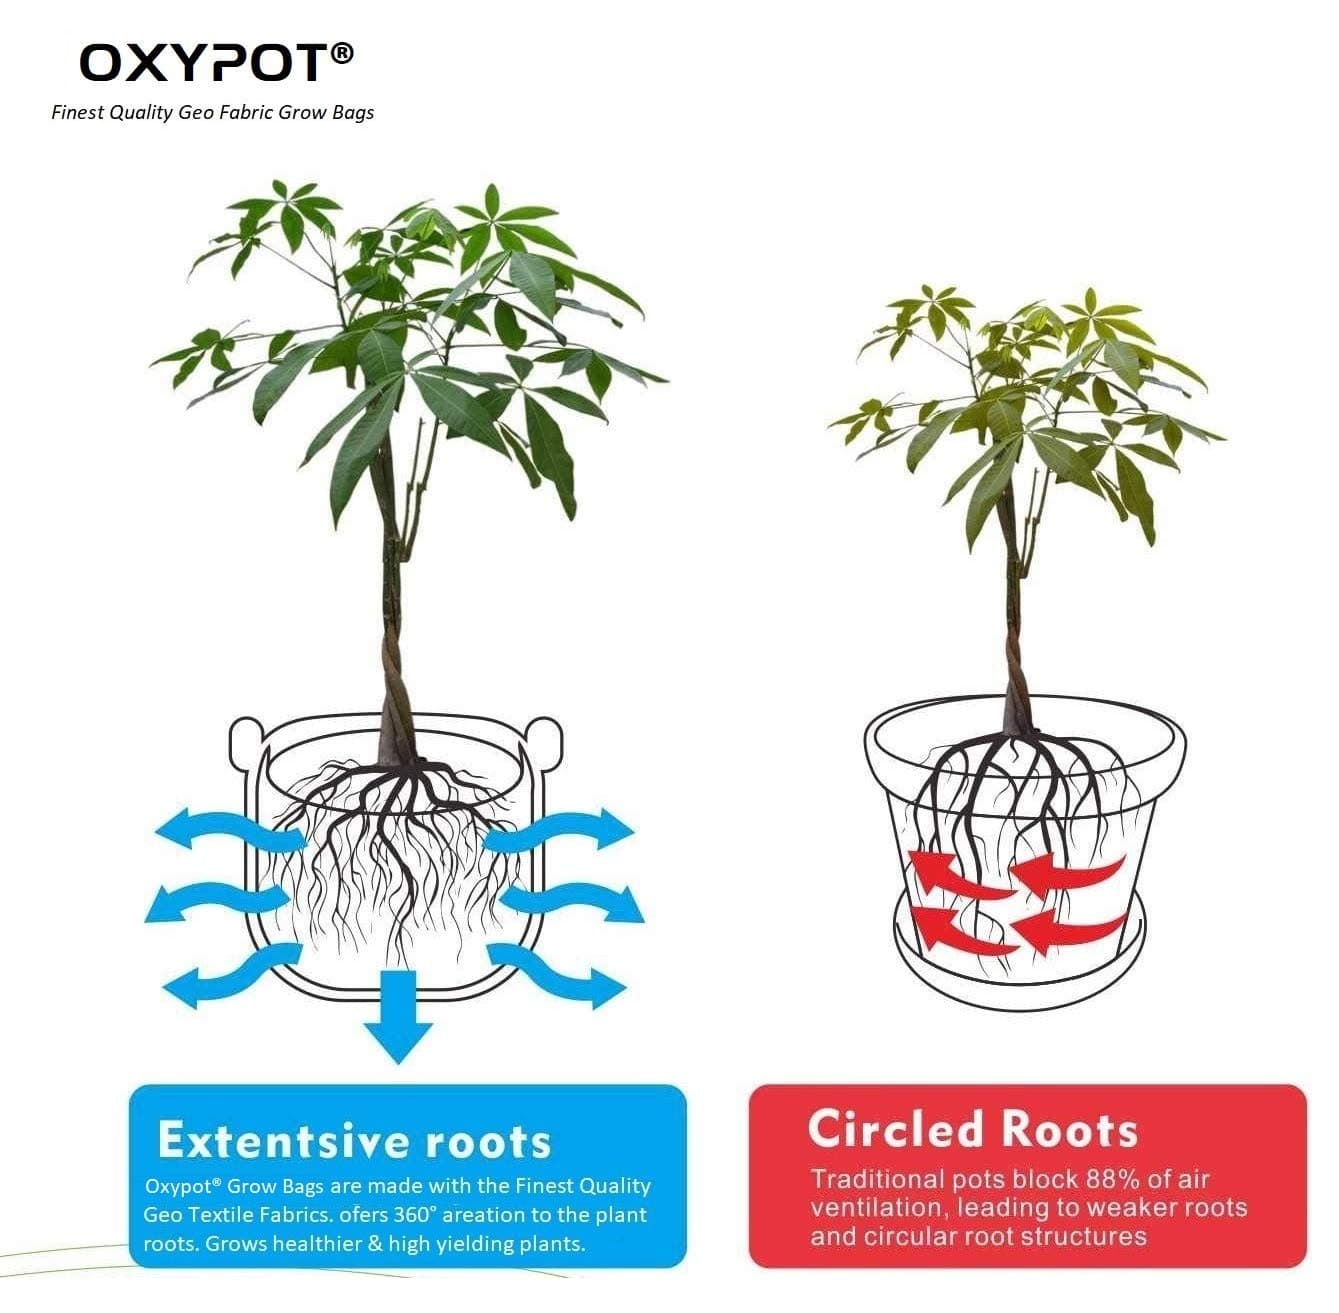 Oxypot Geo Fabric Grow Bags (16X16X 6 Inches), Pack of 2